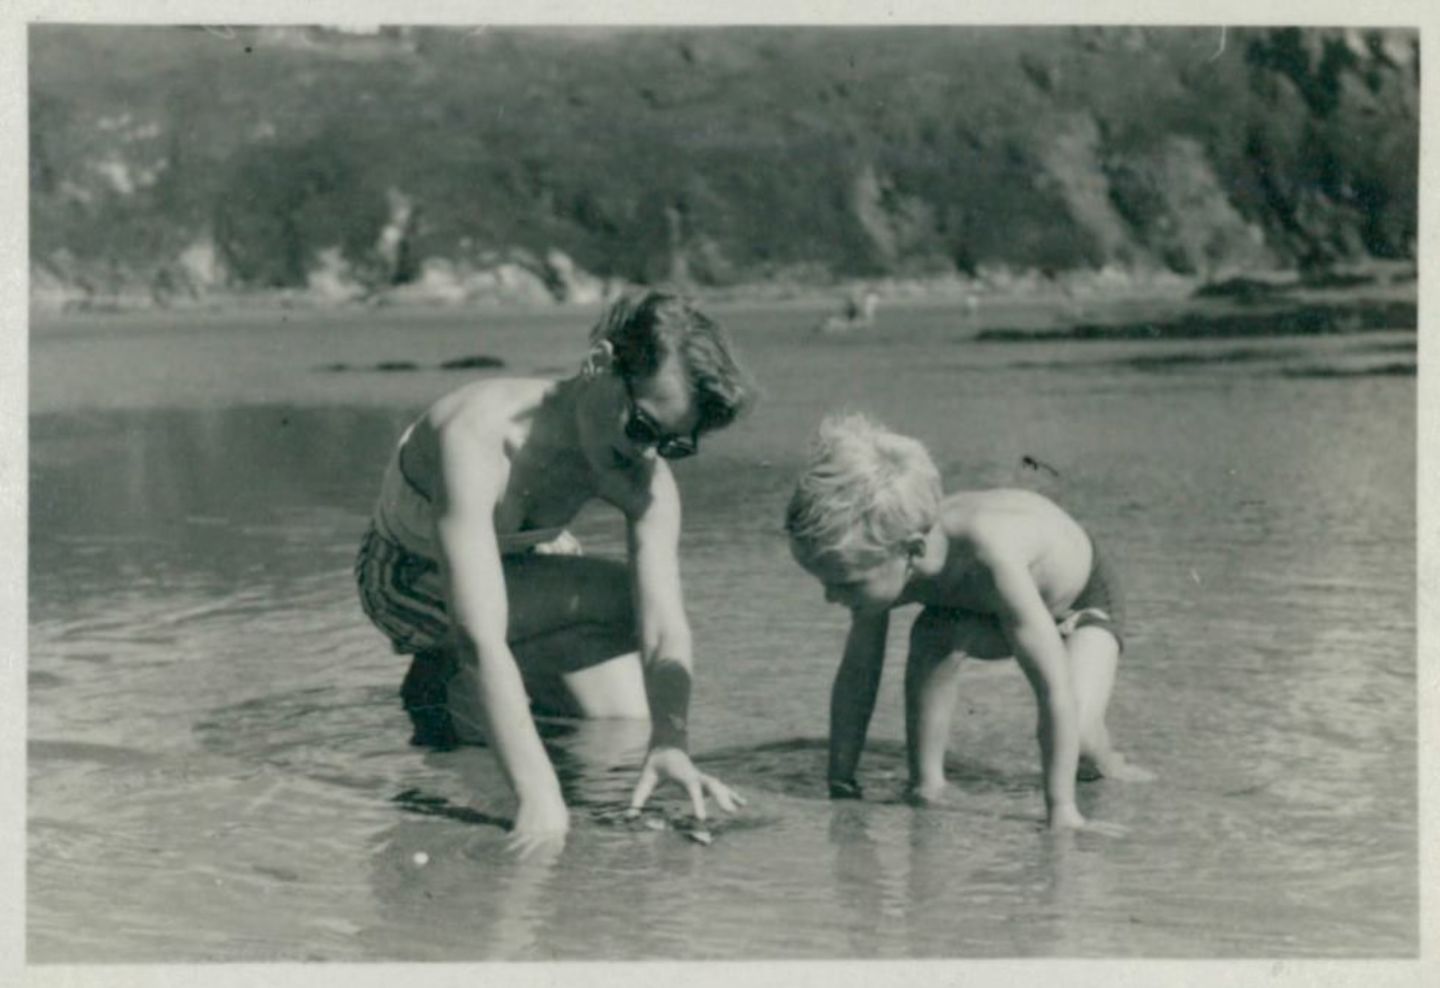 Archive photo of Richard Branson playing on the beach as a child 